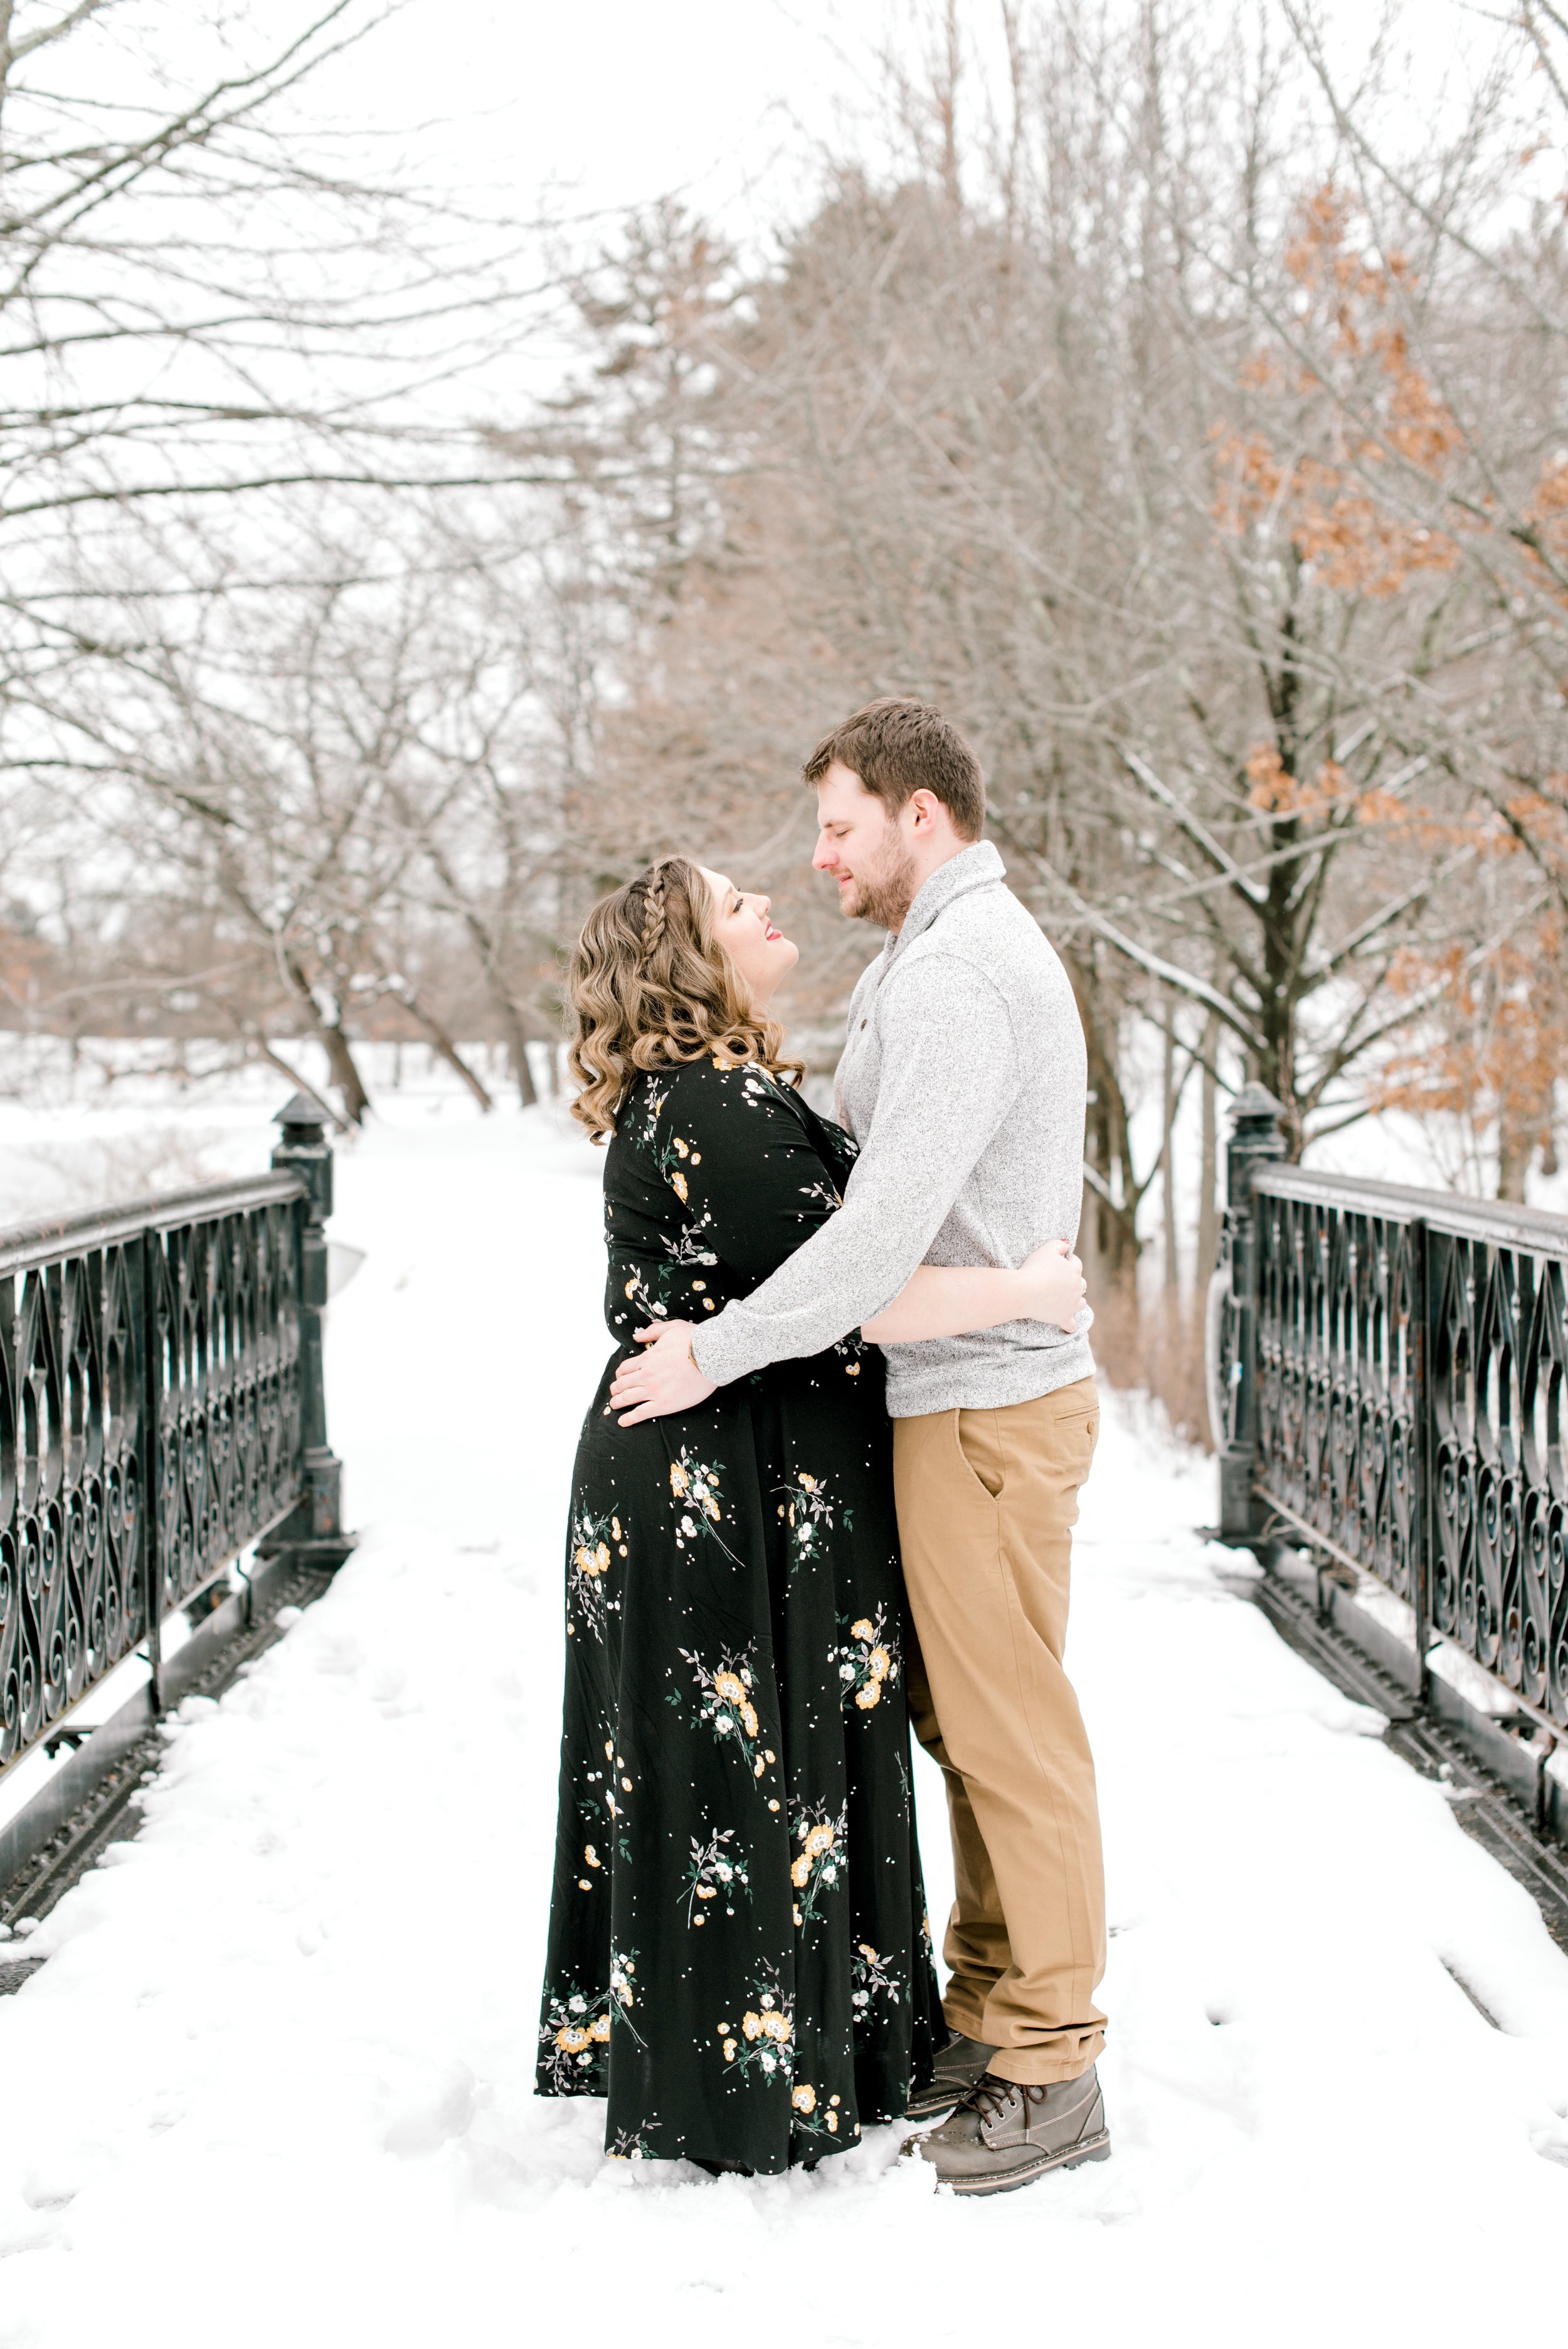 1march2019-roger-williams-park-snow-engagement-session-1.jpg